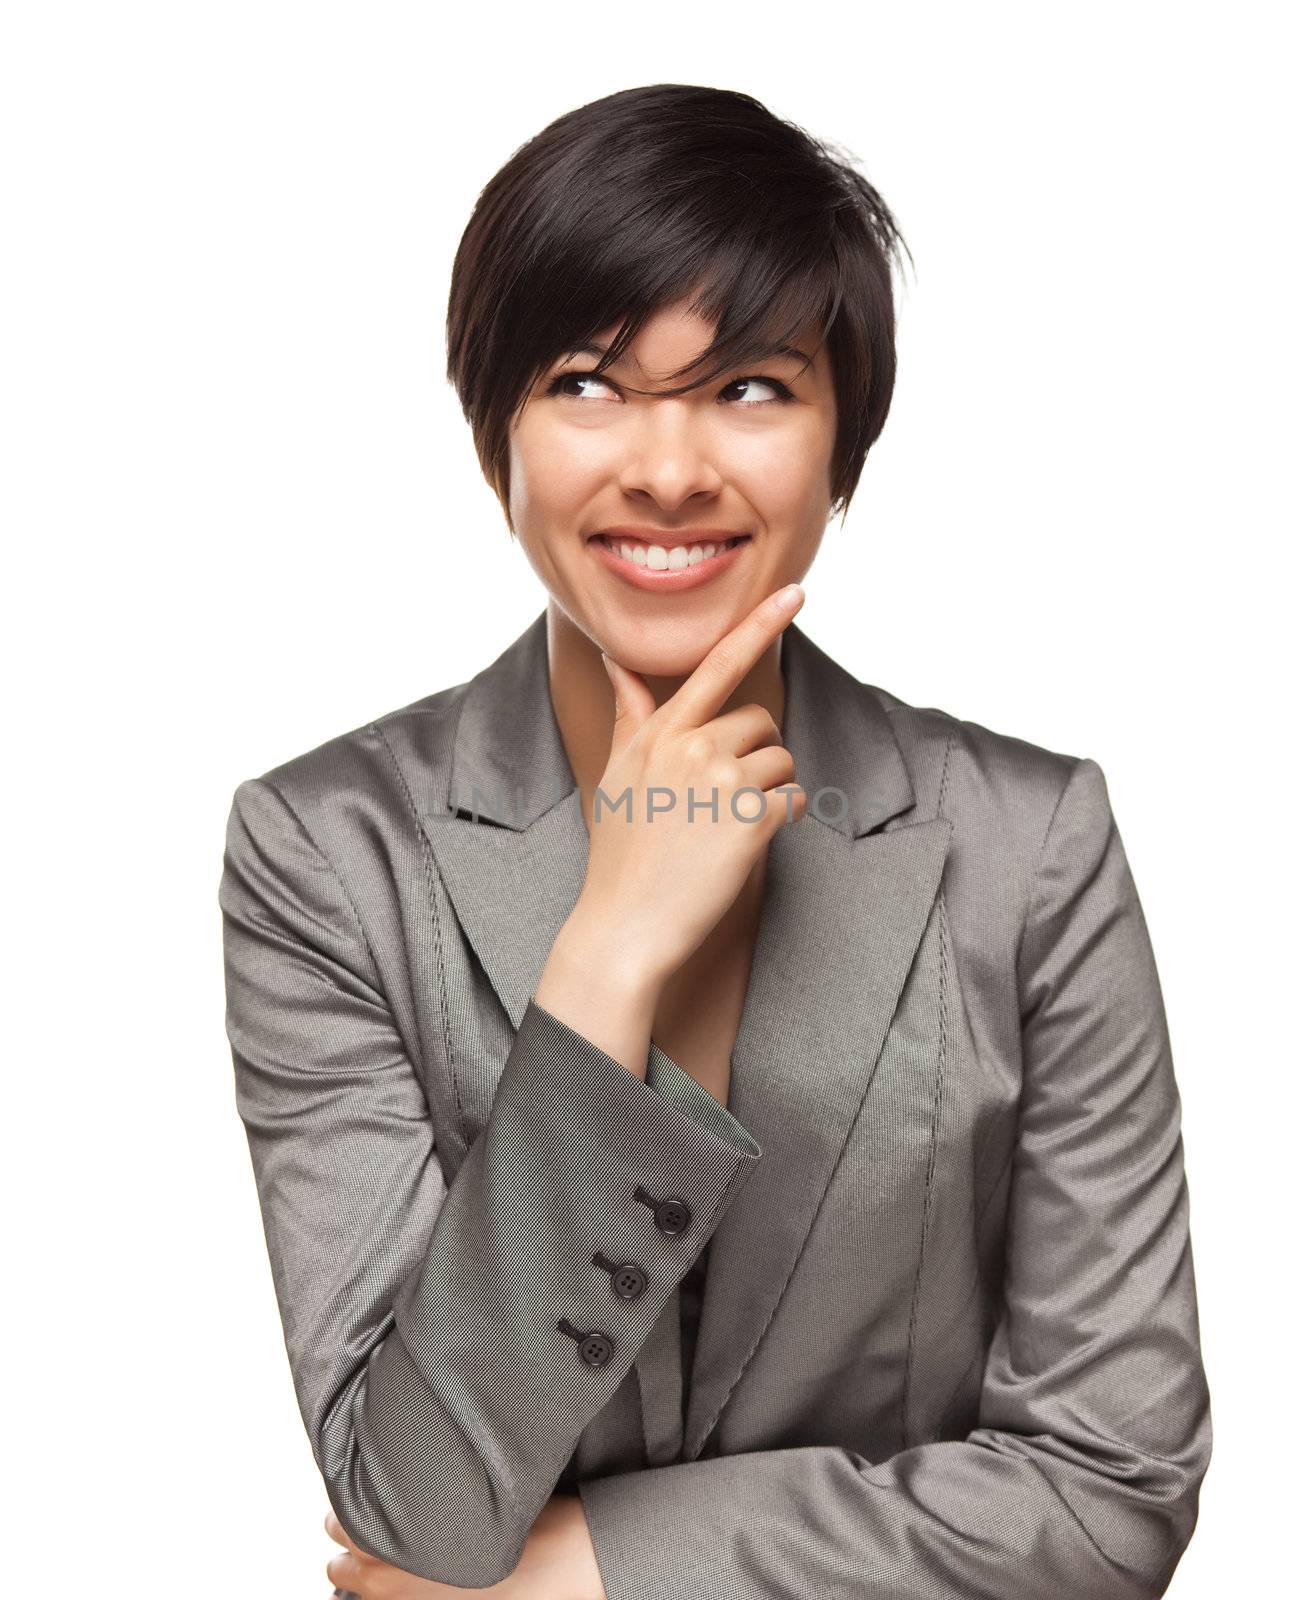 Pretty Smiling Multiethnic Young Adult Woman with Eyes Up and Over Isolated on a White Background.